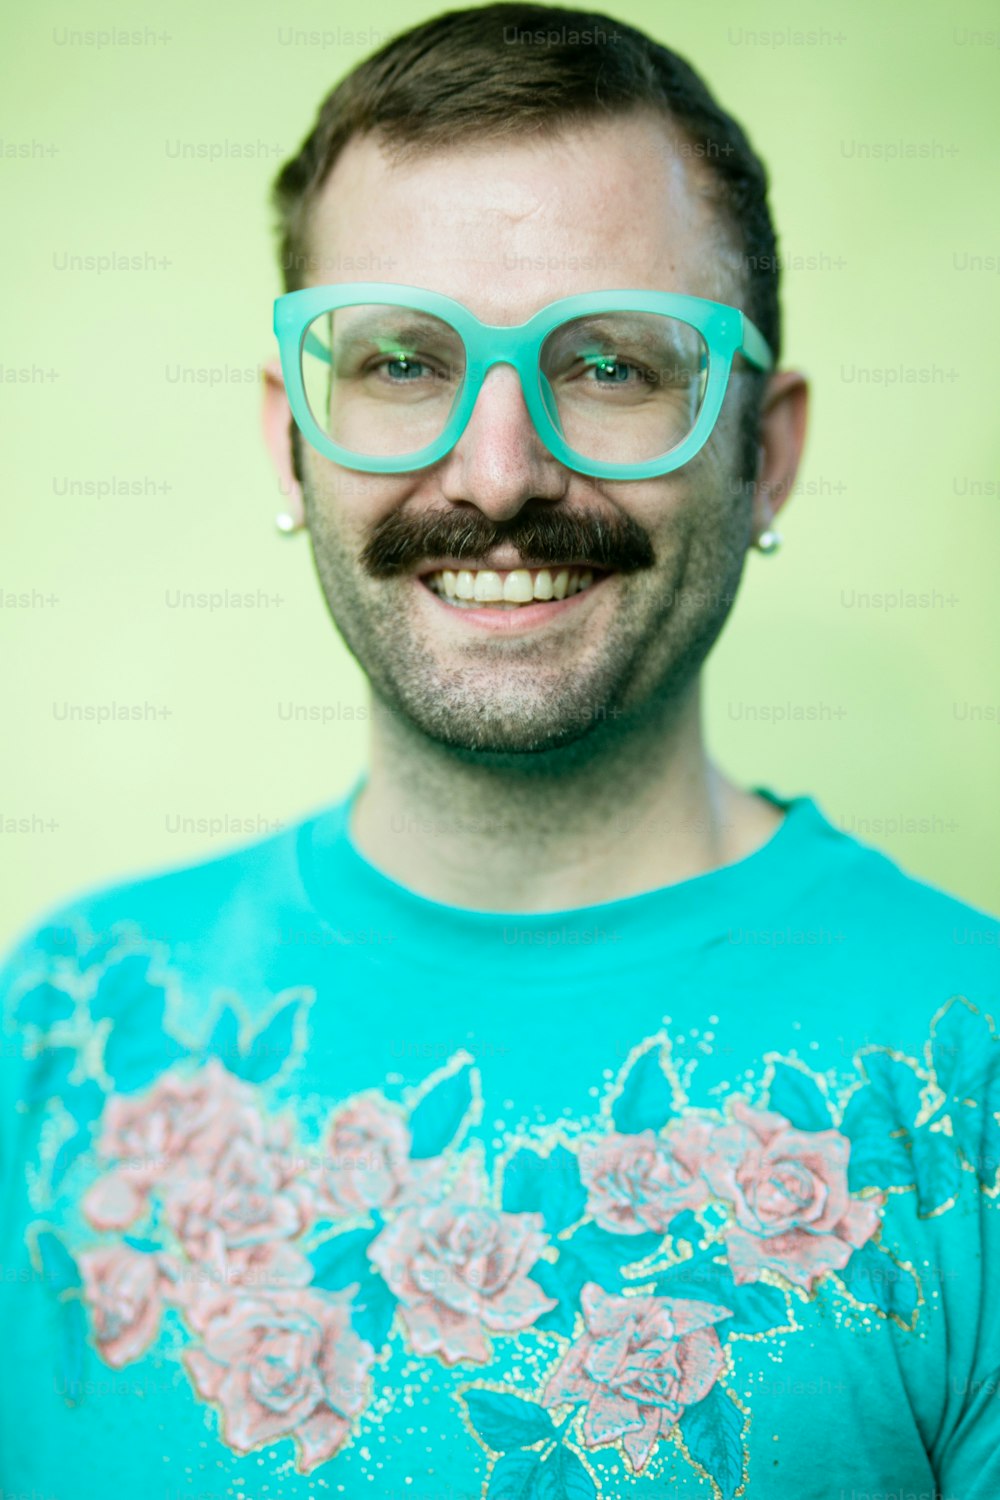 a man with a moustache wearing glasses